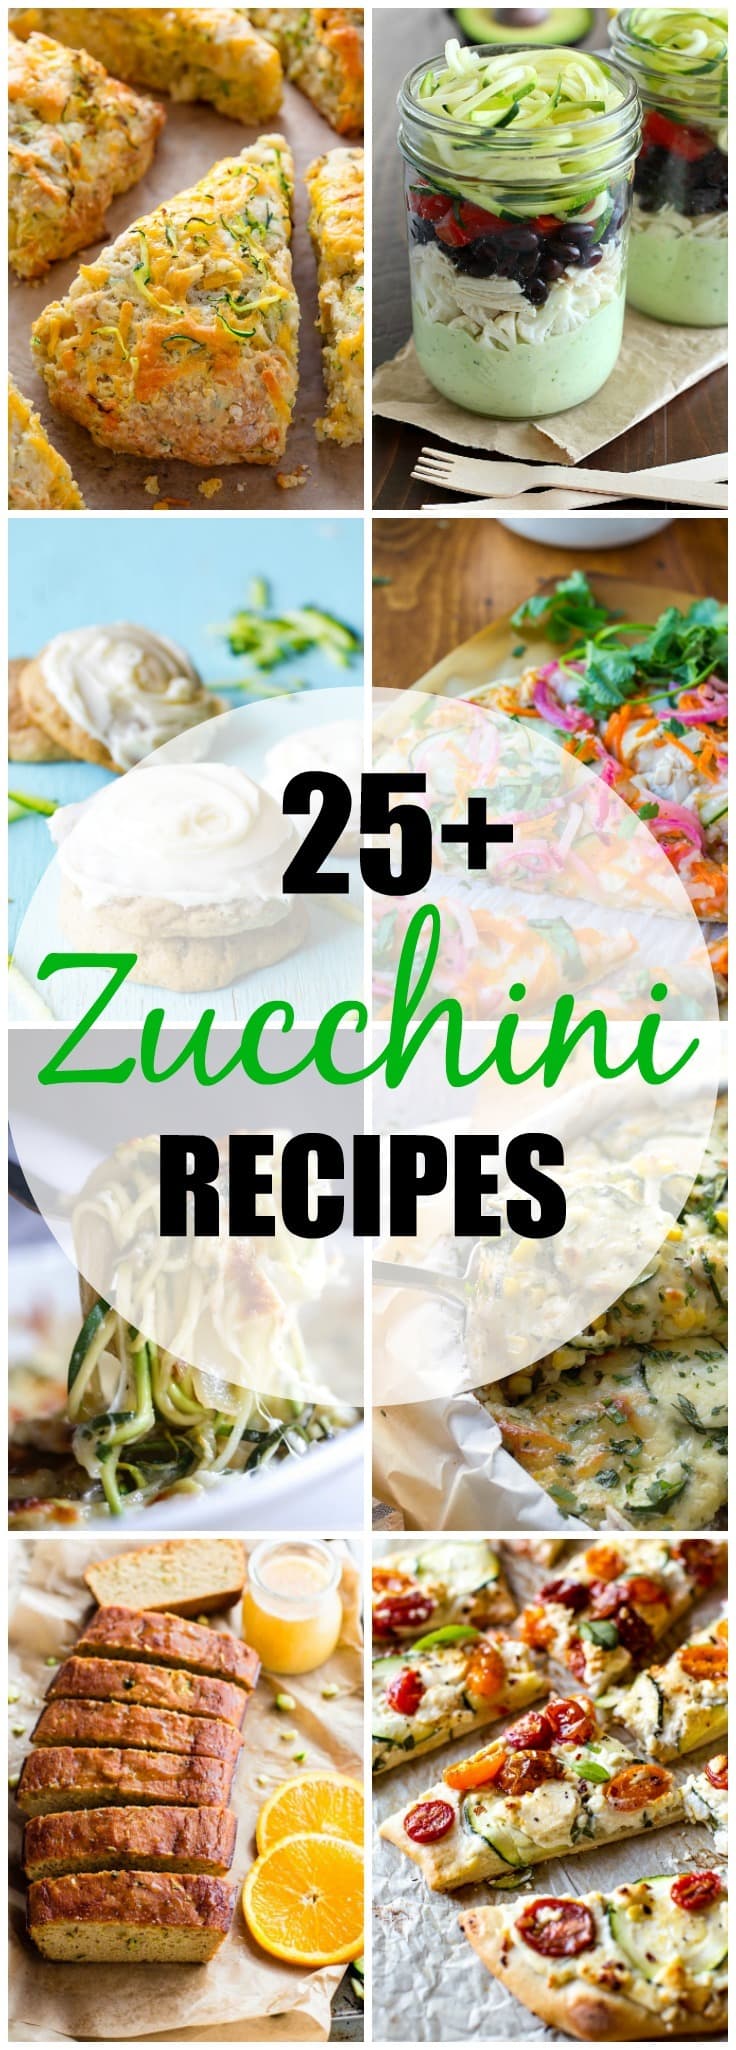 Get your zucchini ready!  You are sure to find something creative and delicious to make in this round up of 25+ Zucchini Recipes! Perfect recipes for the end of summer - or all year round!